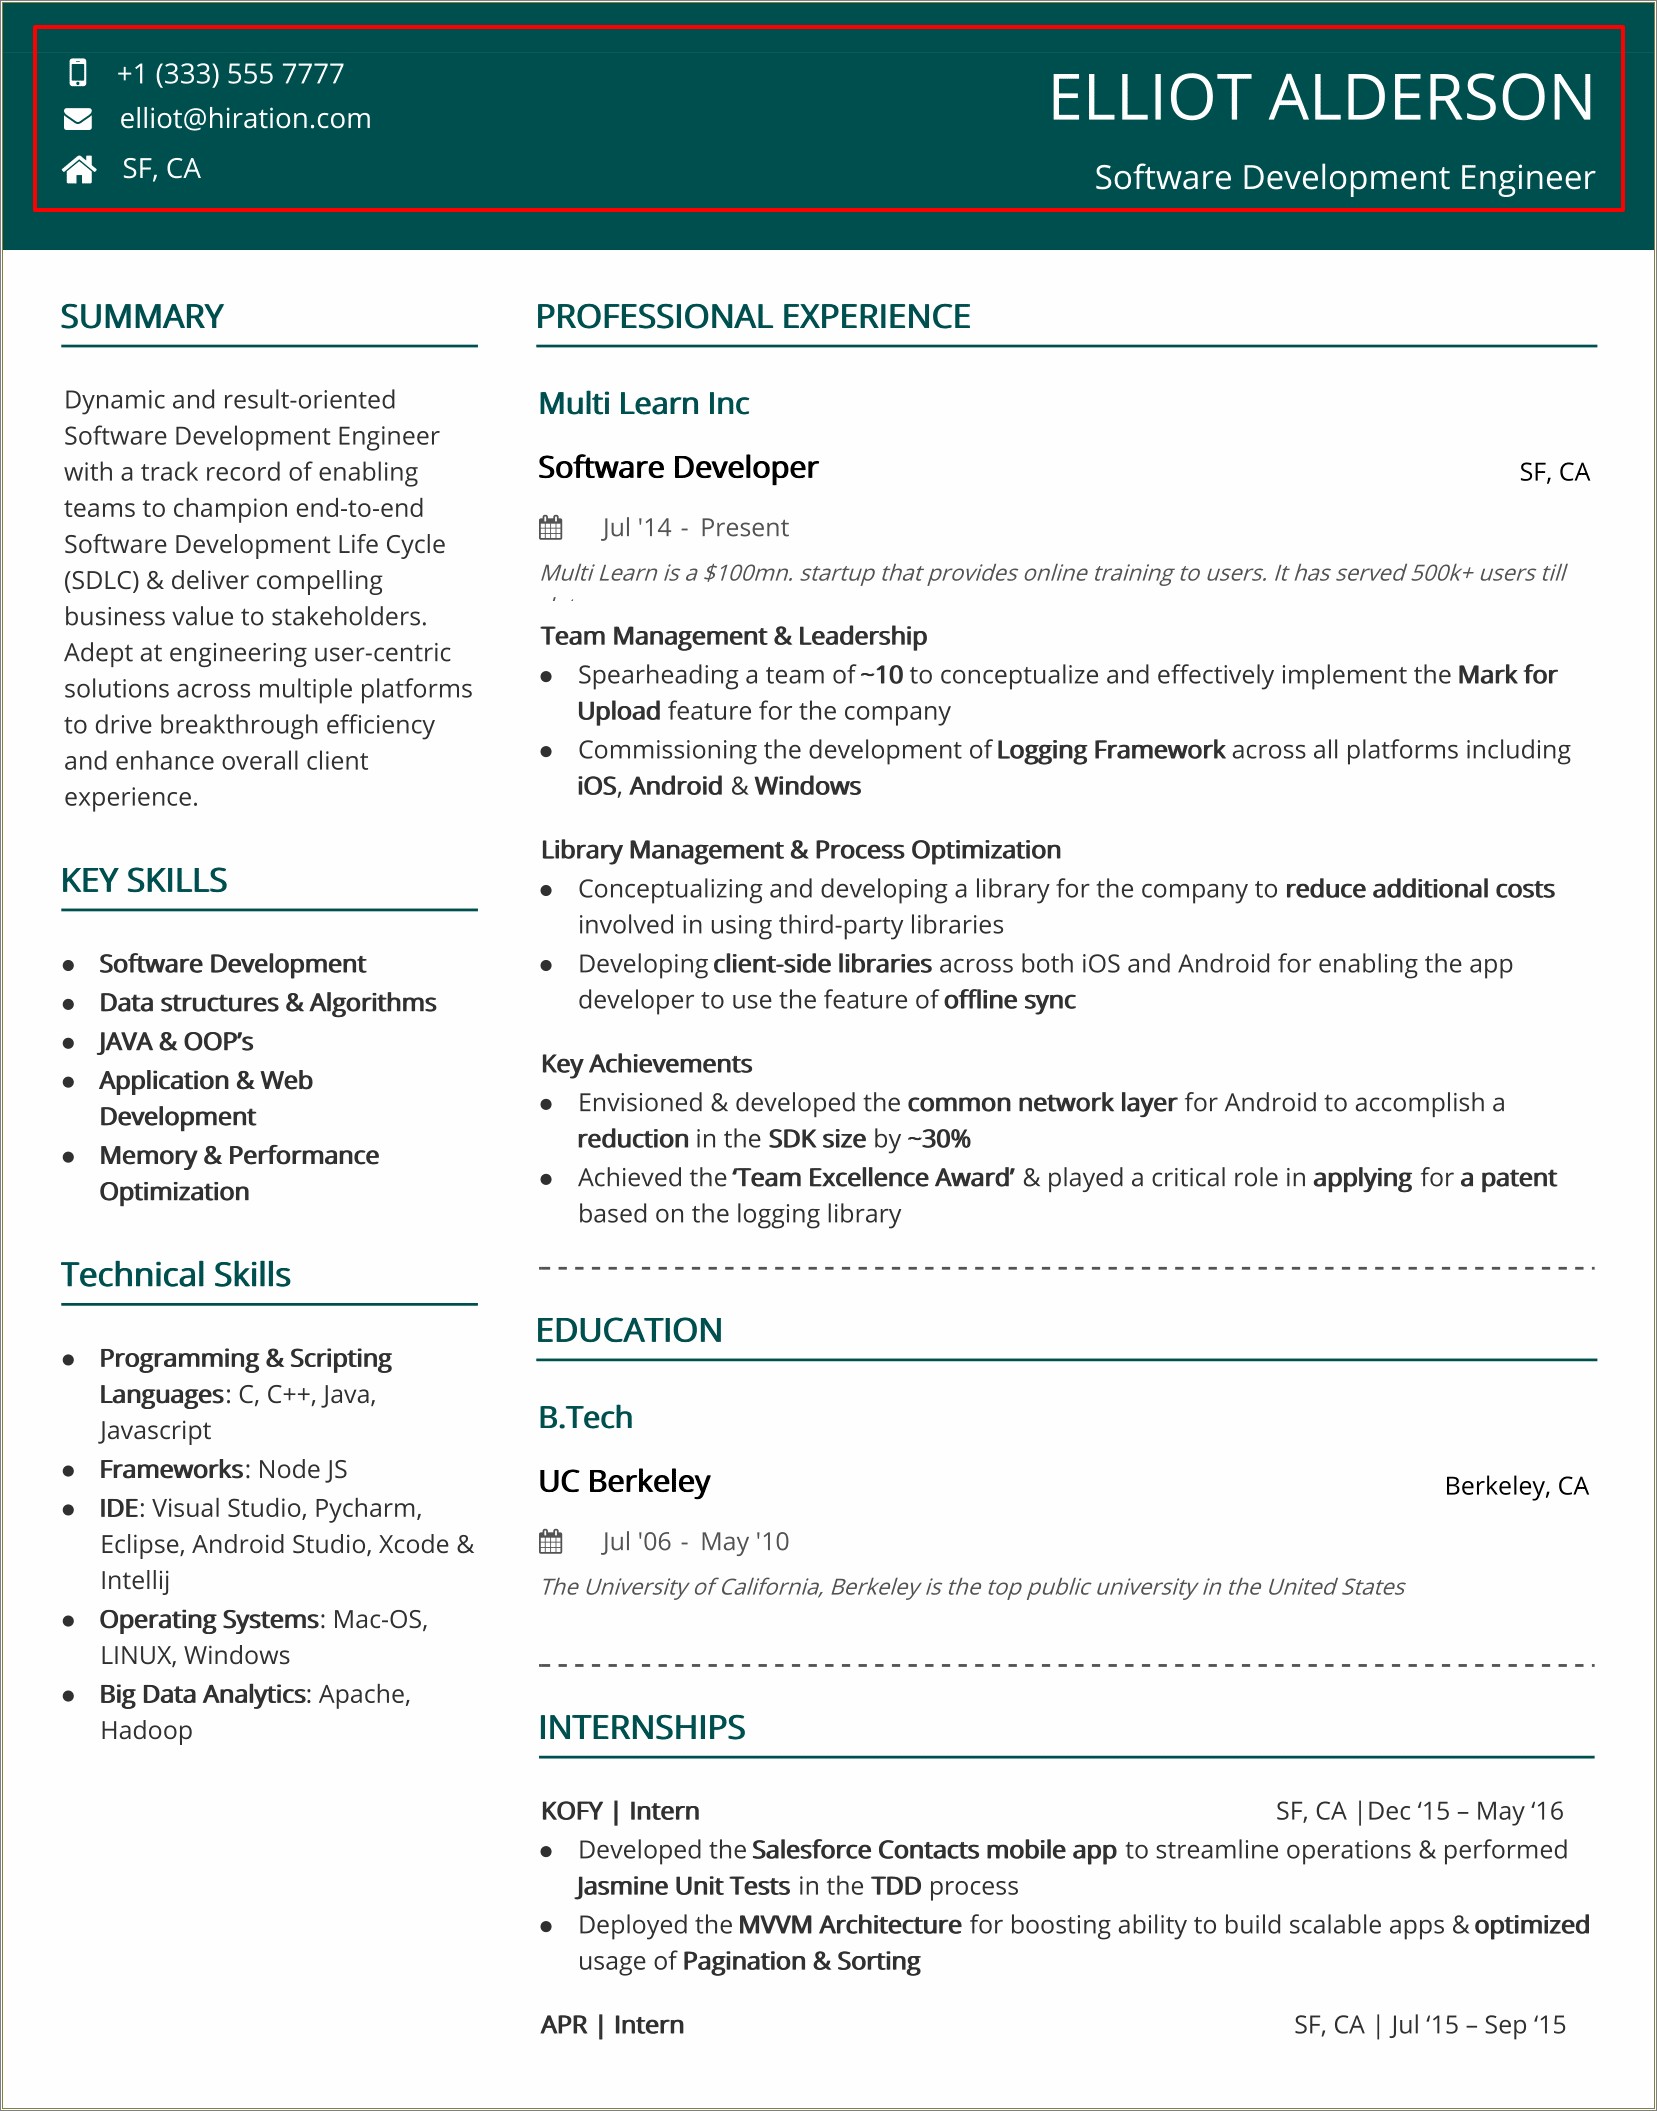 Sample Images Of Top Rated Resume Headers